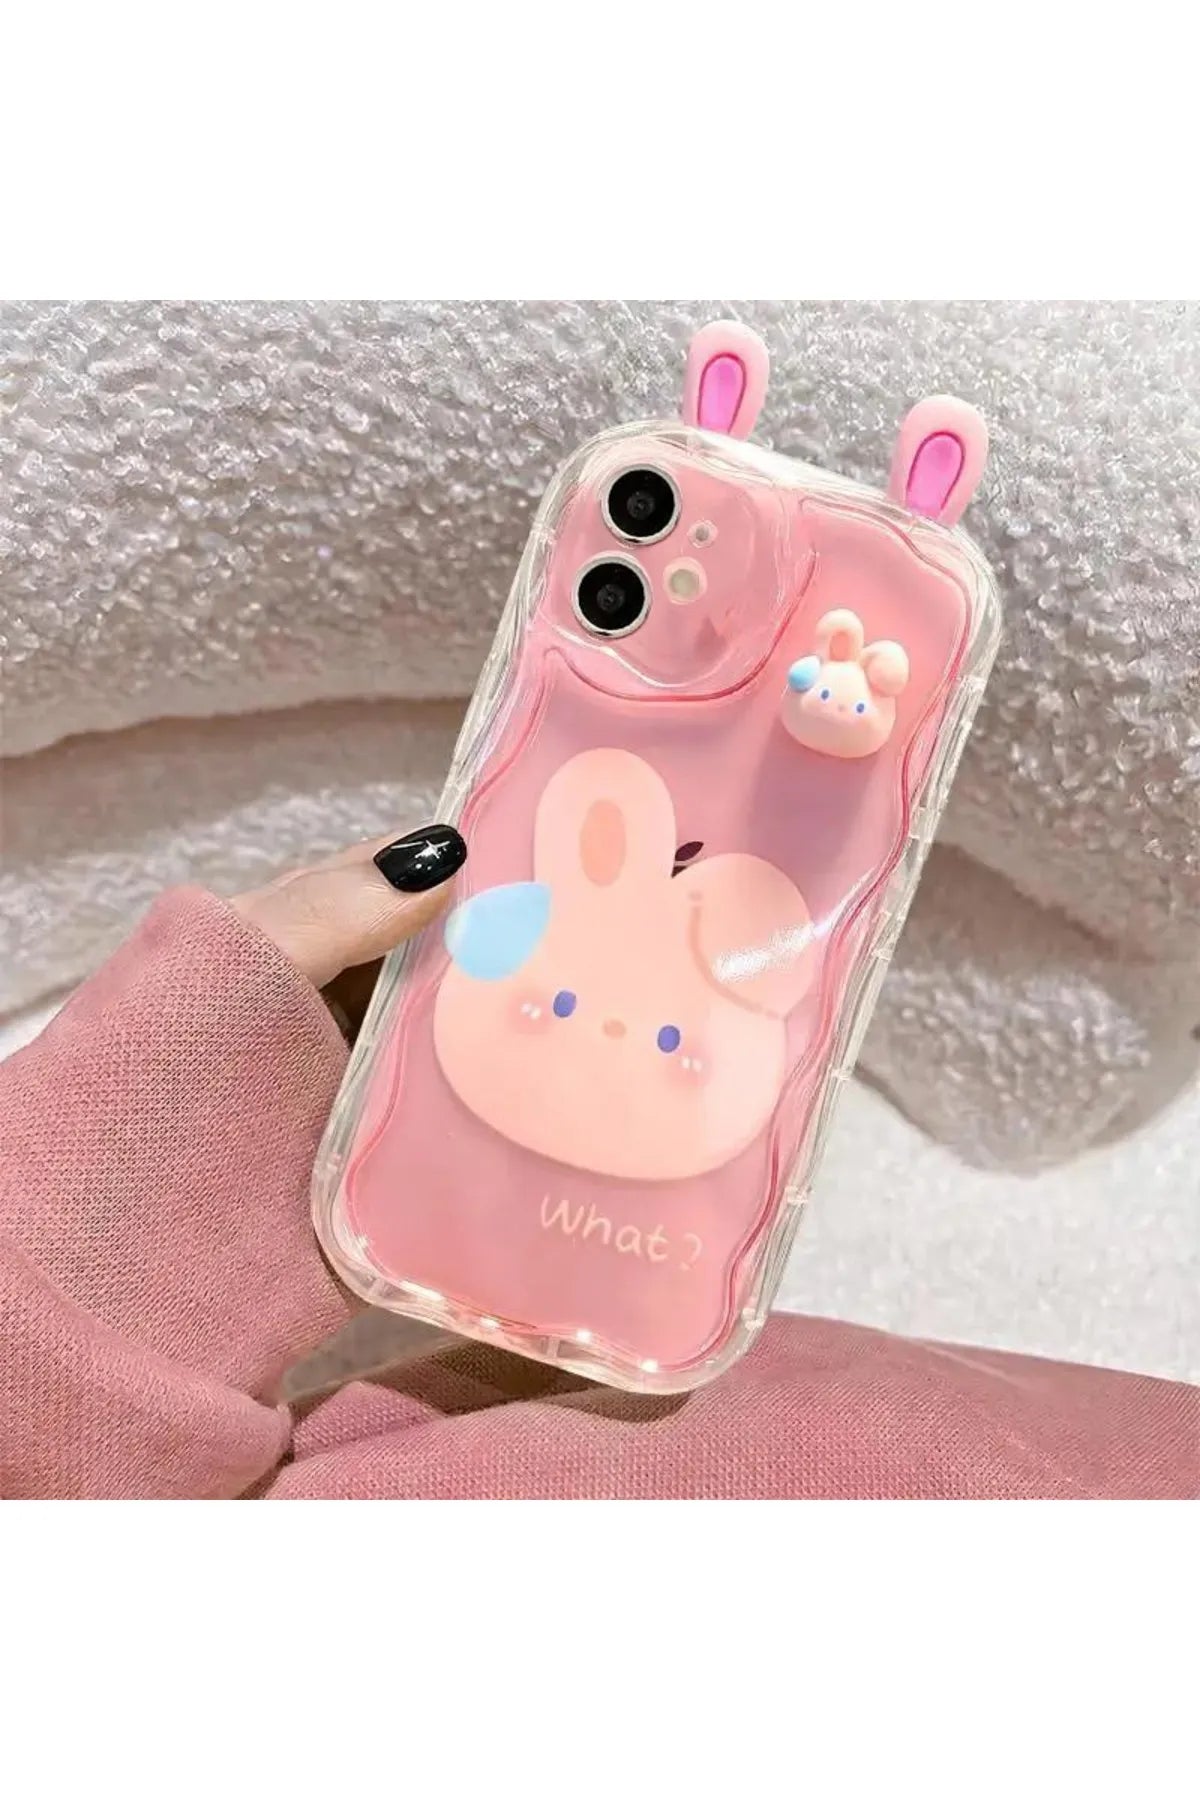 Compatible with iPhone 11 - Cute Cartoon Eared Toy Design Transparent Silicone Case with Camera Protection - Pink